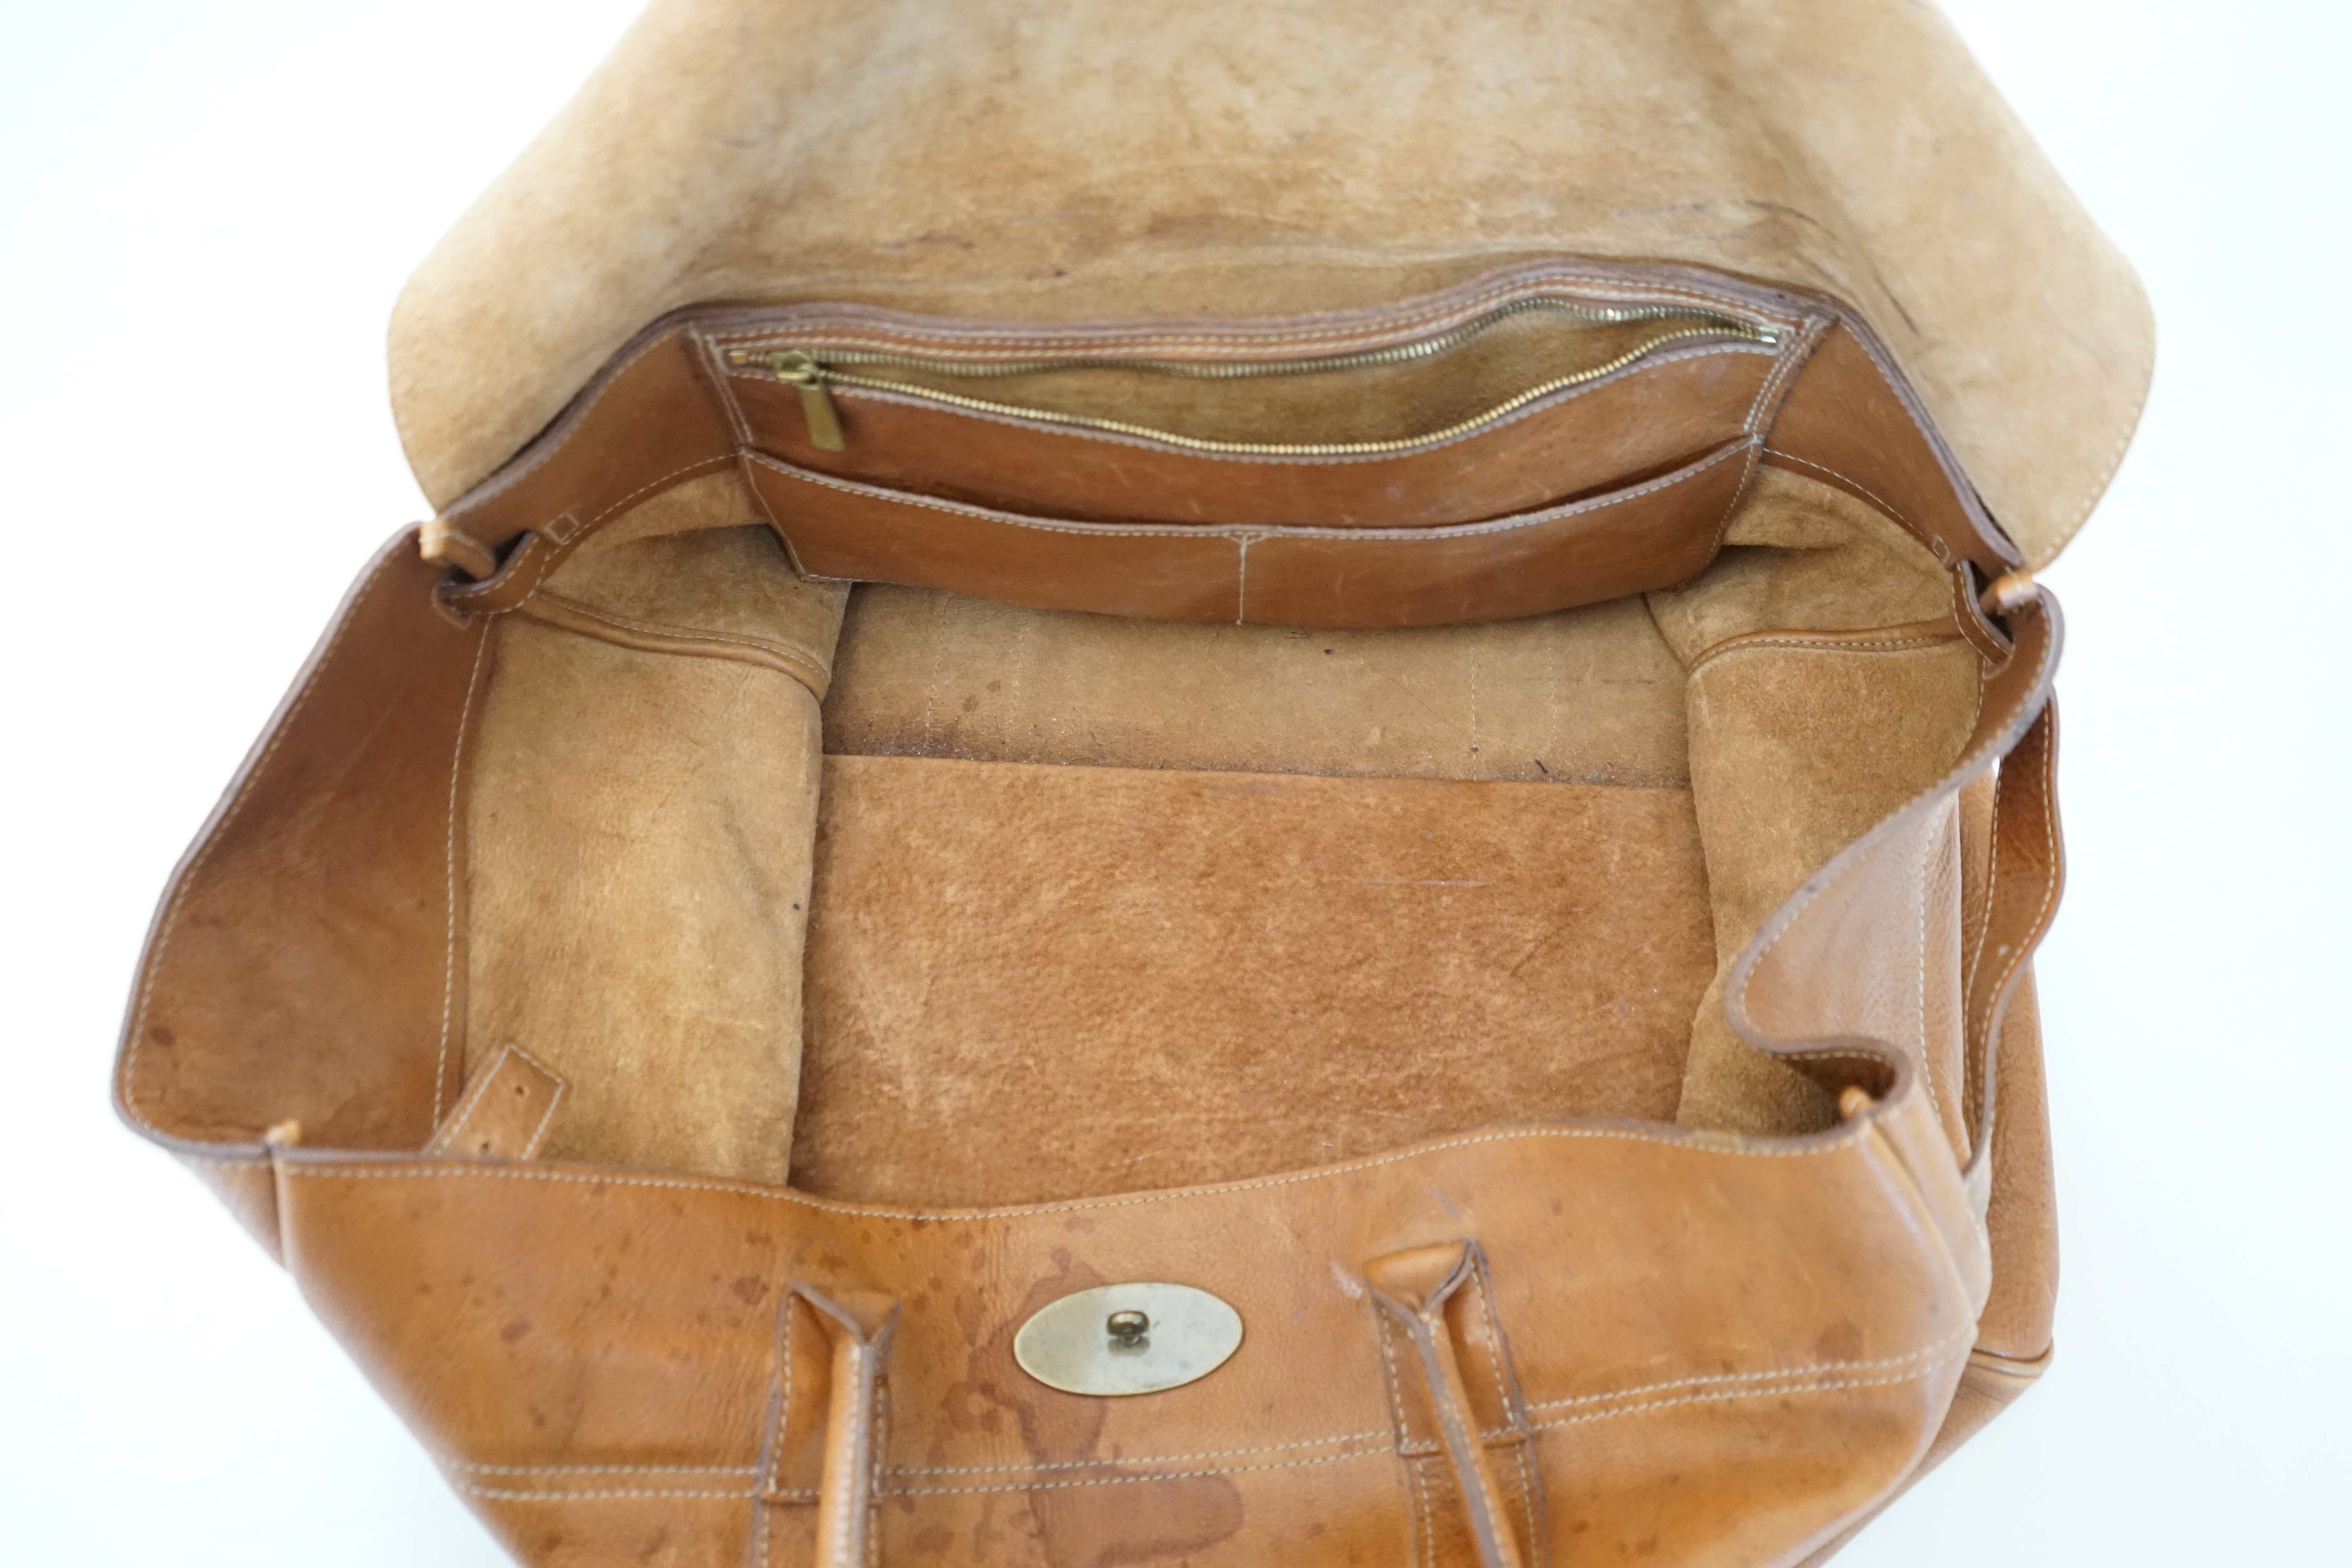 A Mulberry large Bayswater, in natural grain tan brown leather width 50cm, depth 20cm, height 30cm